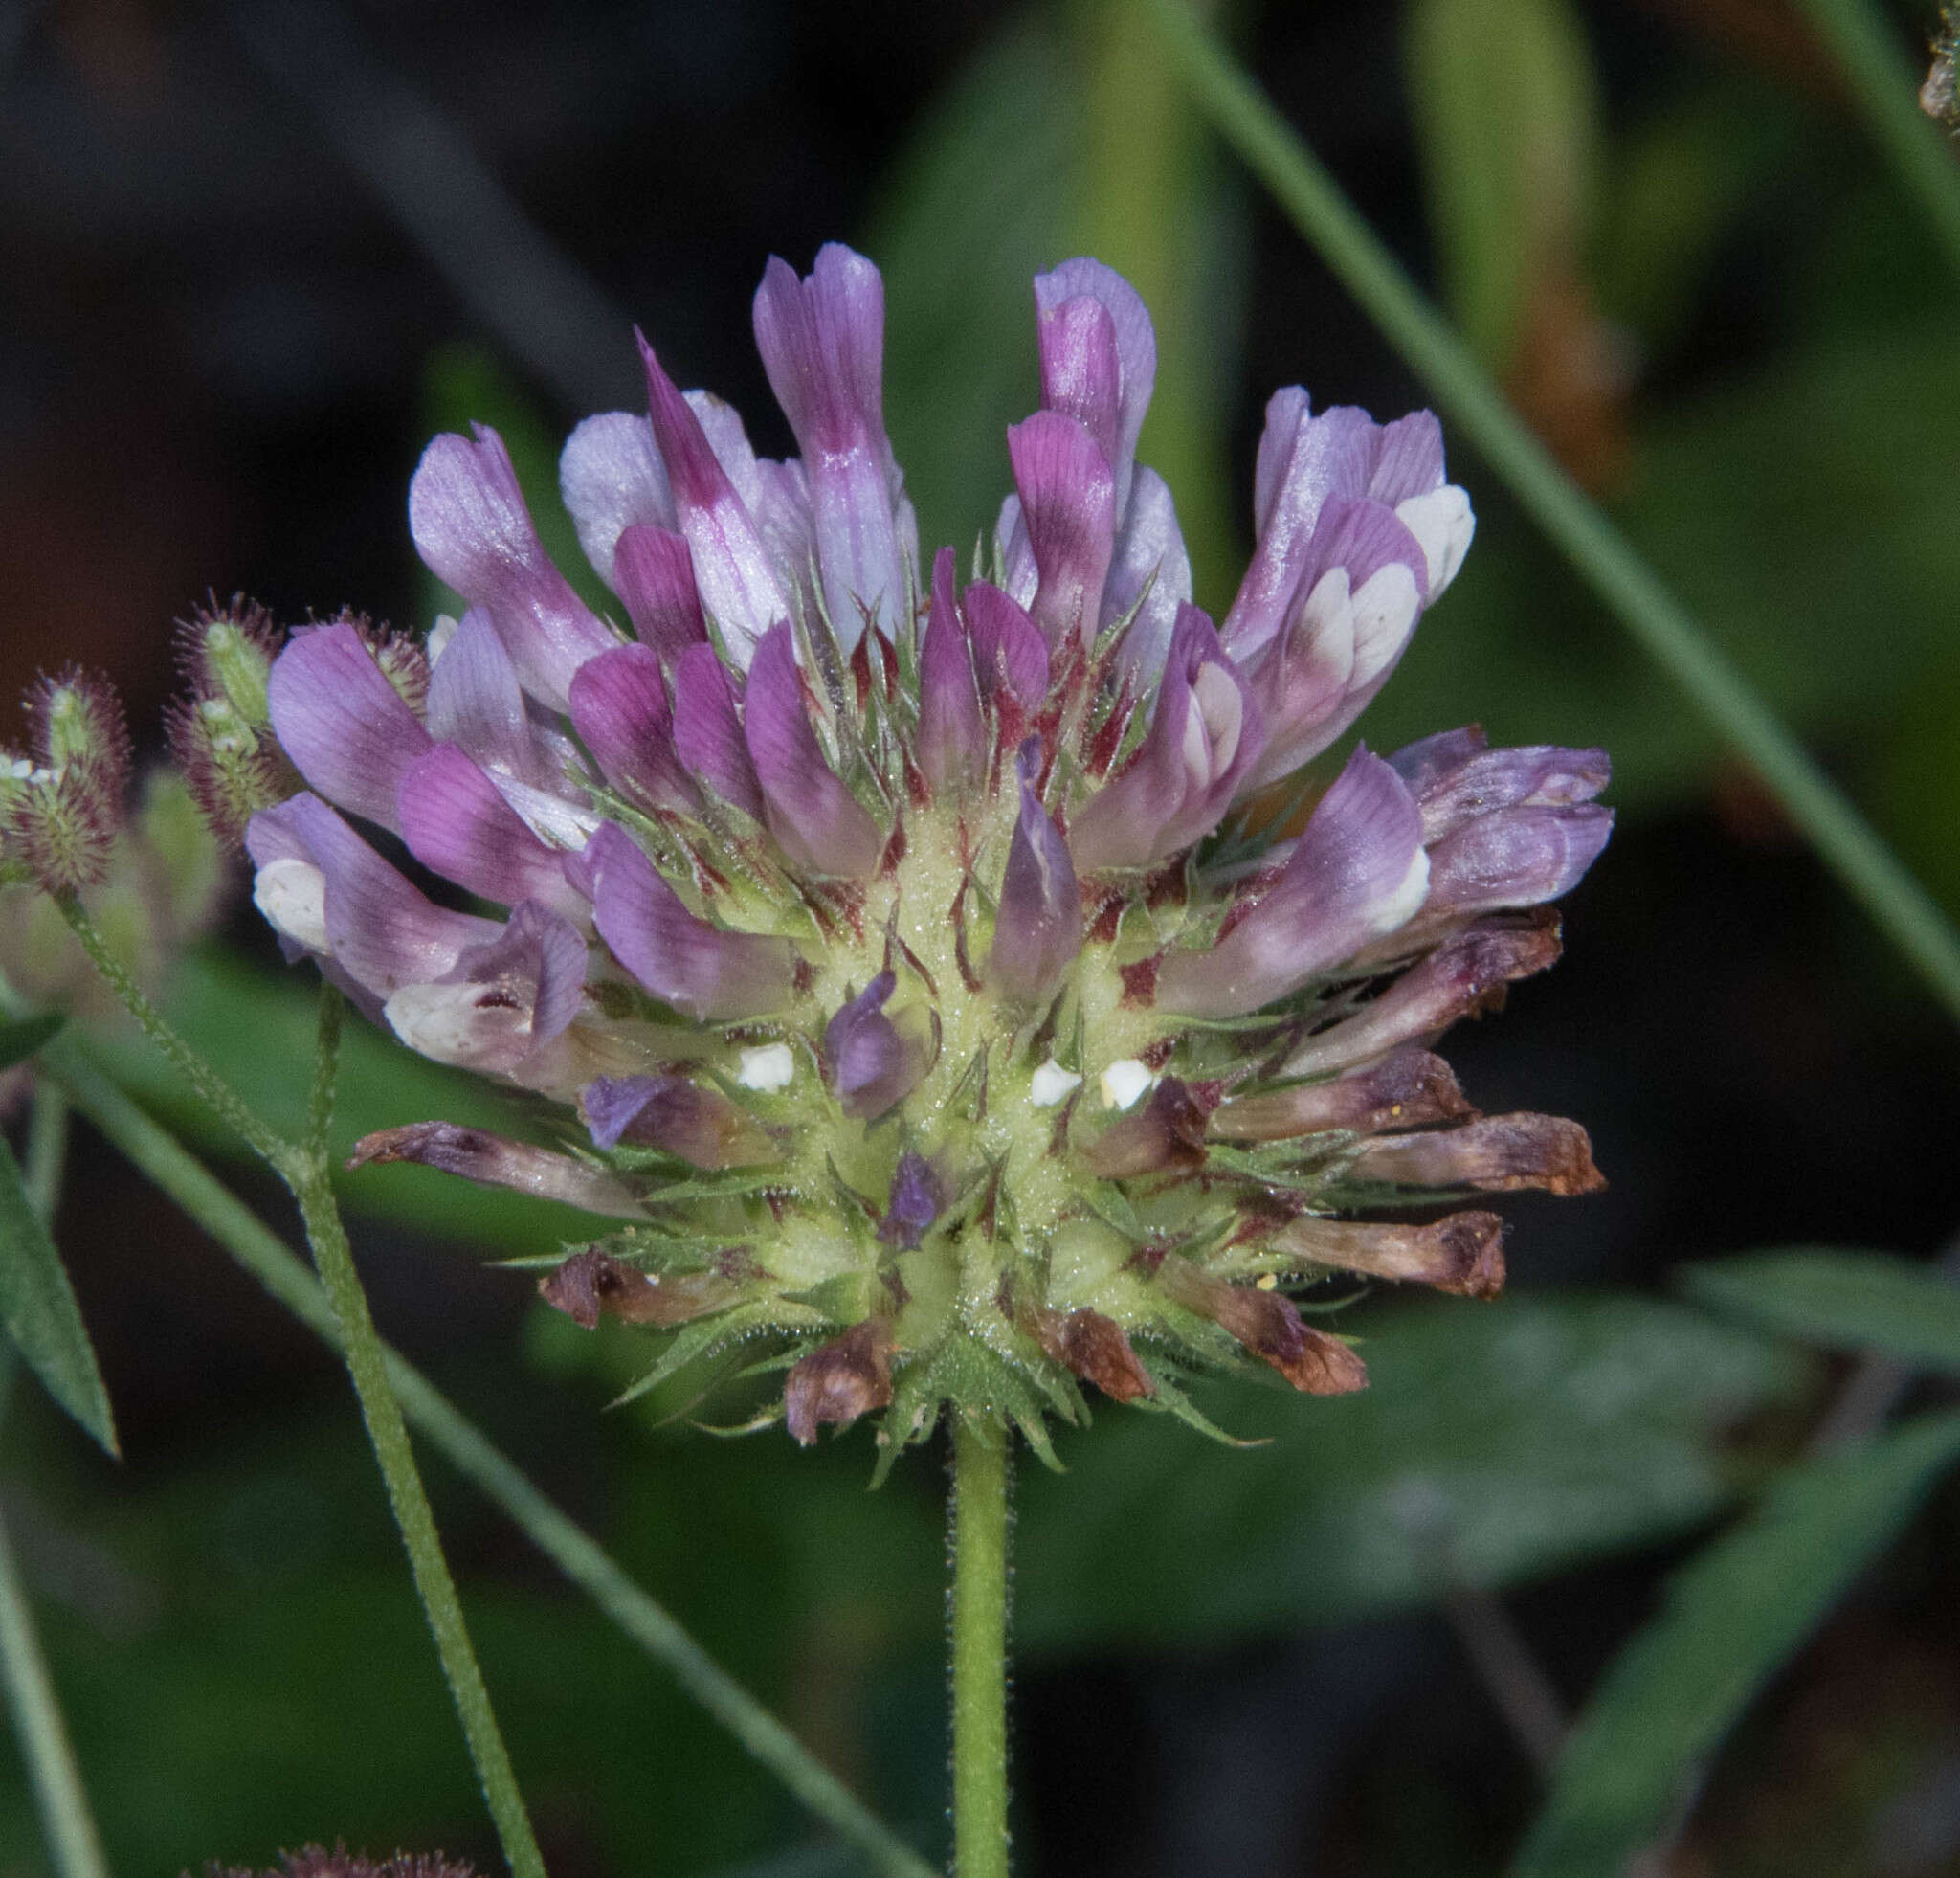 Image of clammy clover